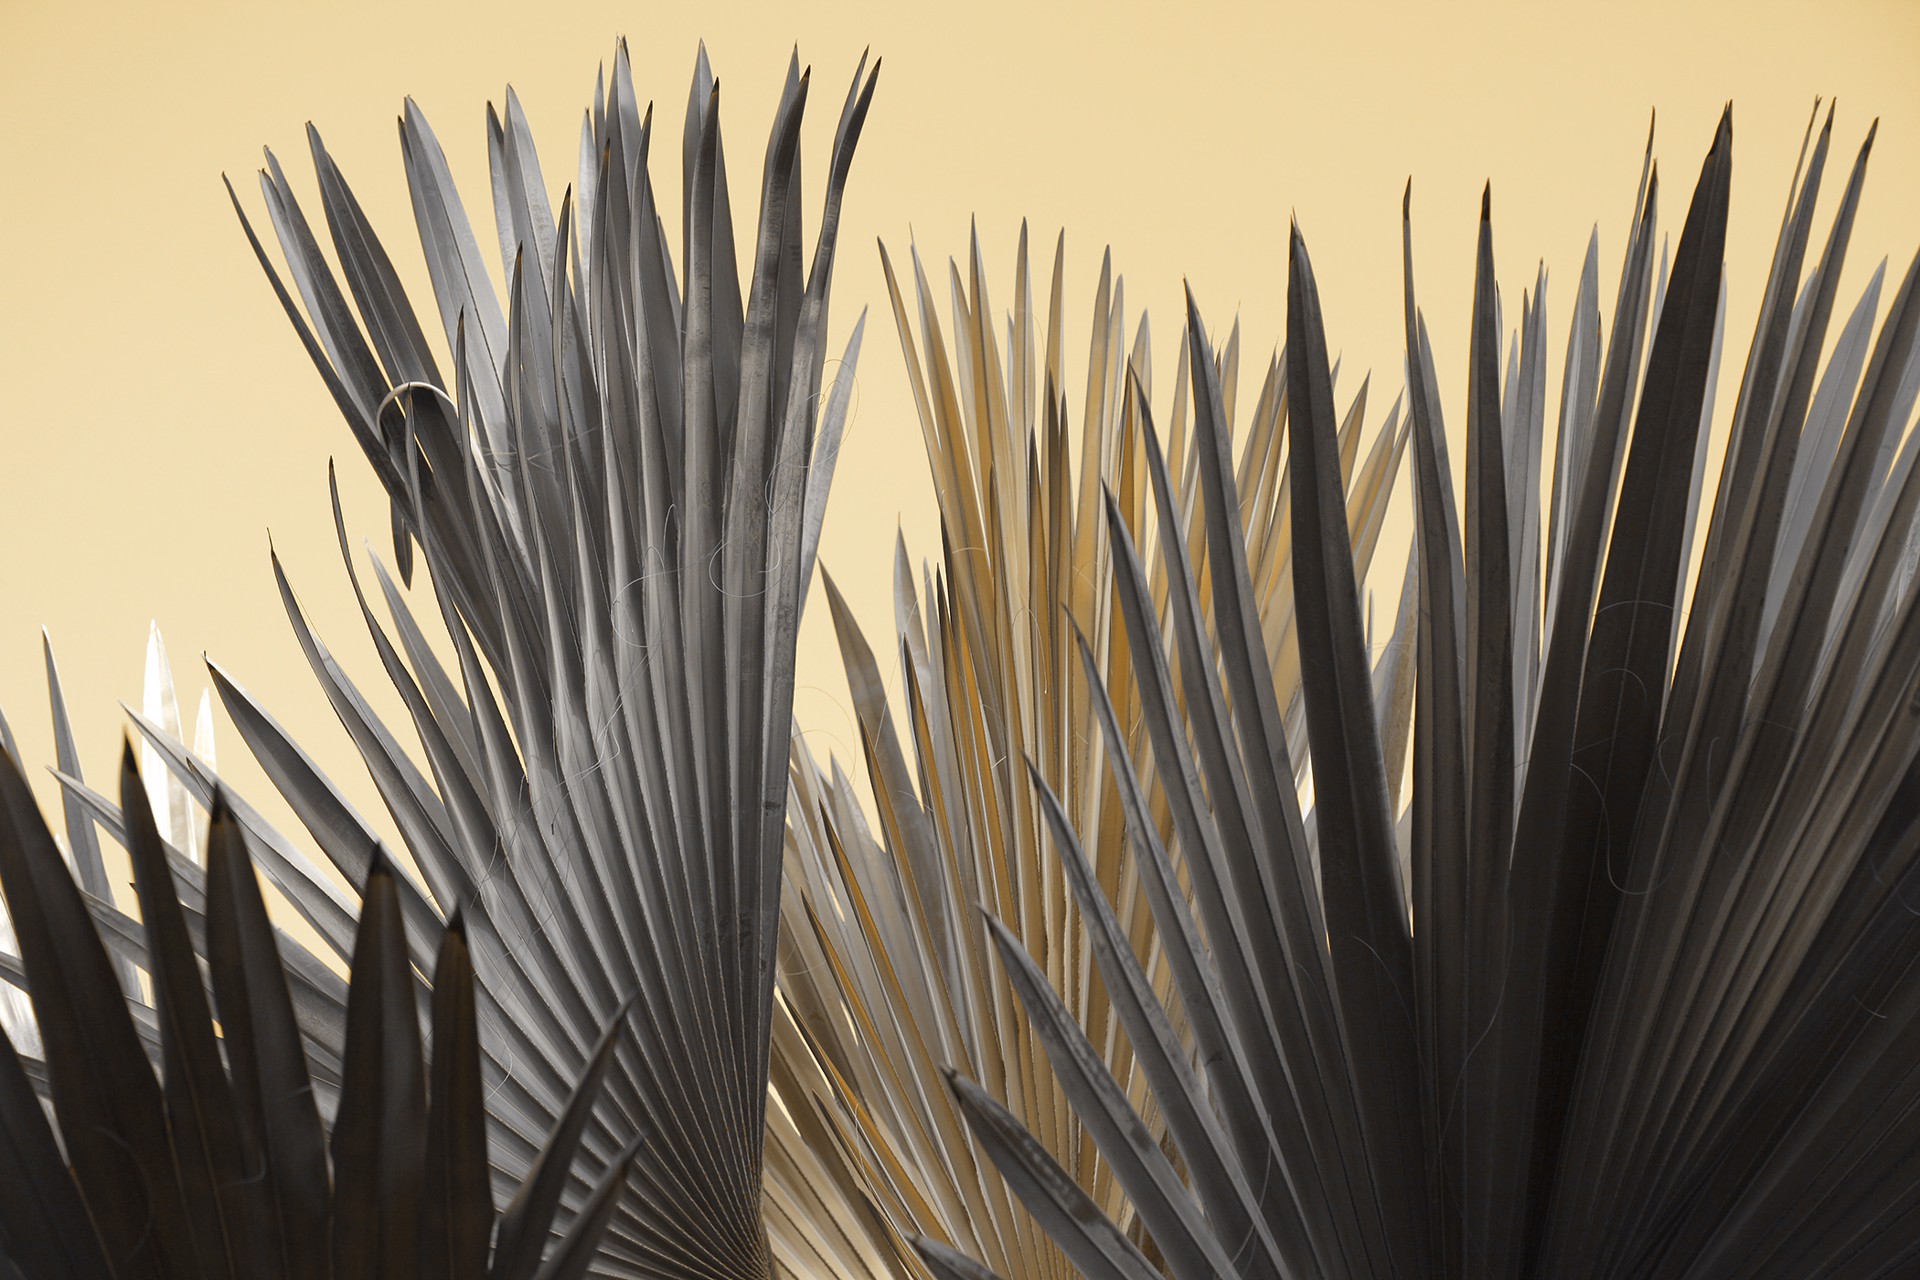 Wing of Fronds by Stewart Nelson